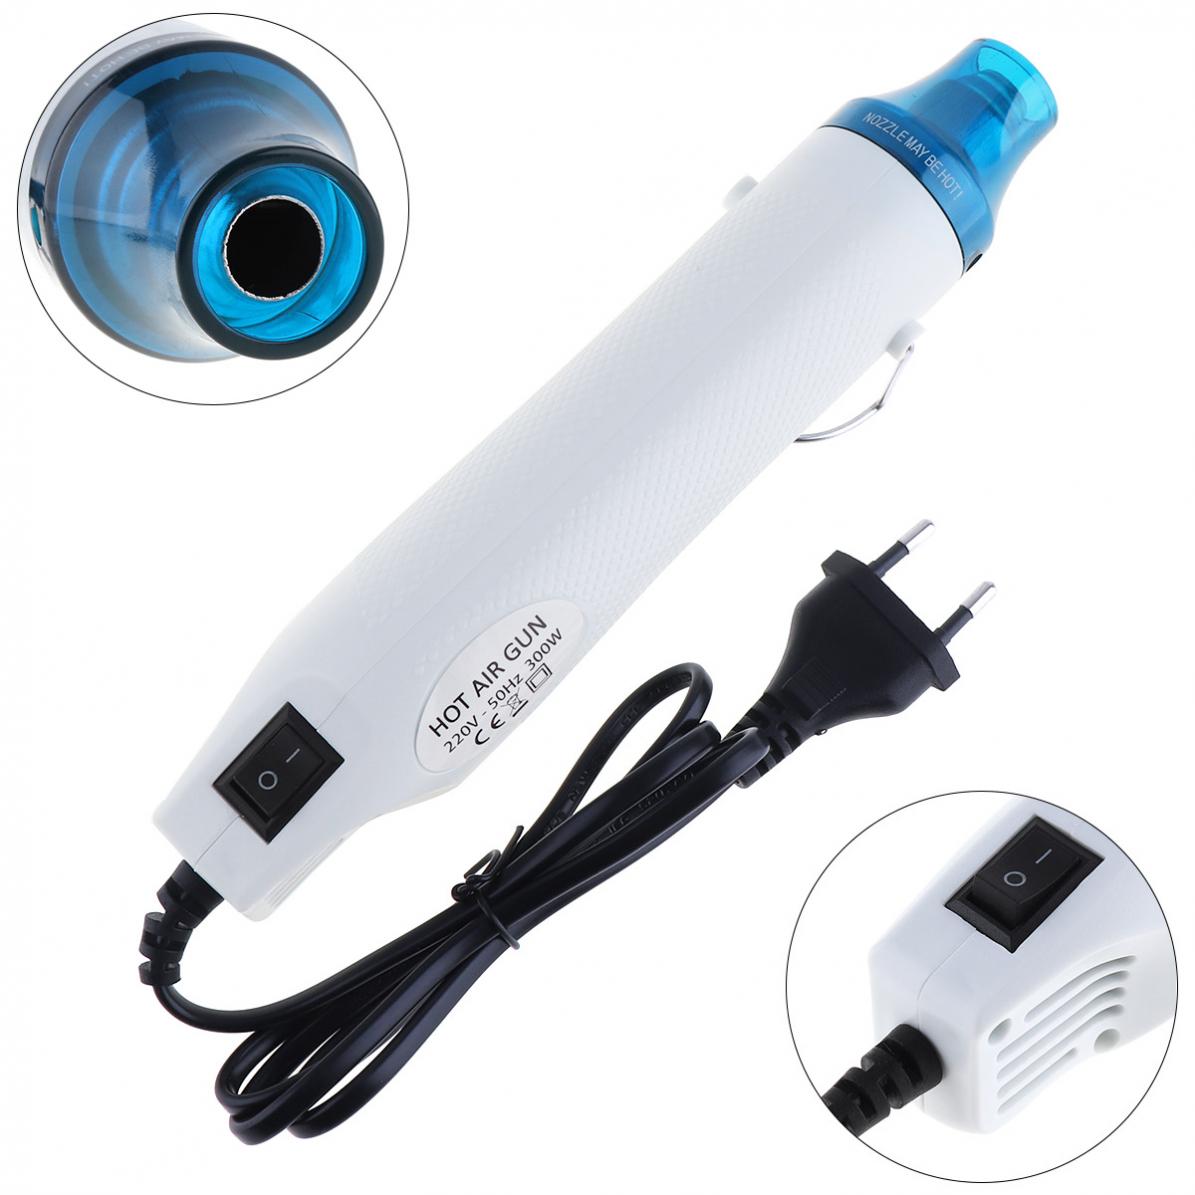 

New 110V ~ 220V 300W Diy Using Heat Gun Electric Tool with Shrink Plastic Surface for Heating DIY Accessories and EU / US Plug